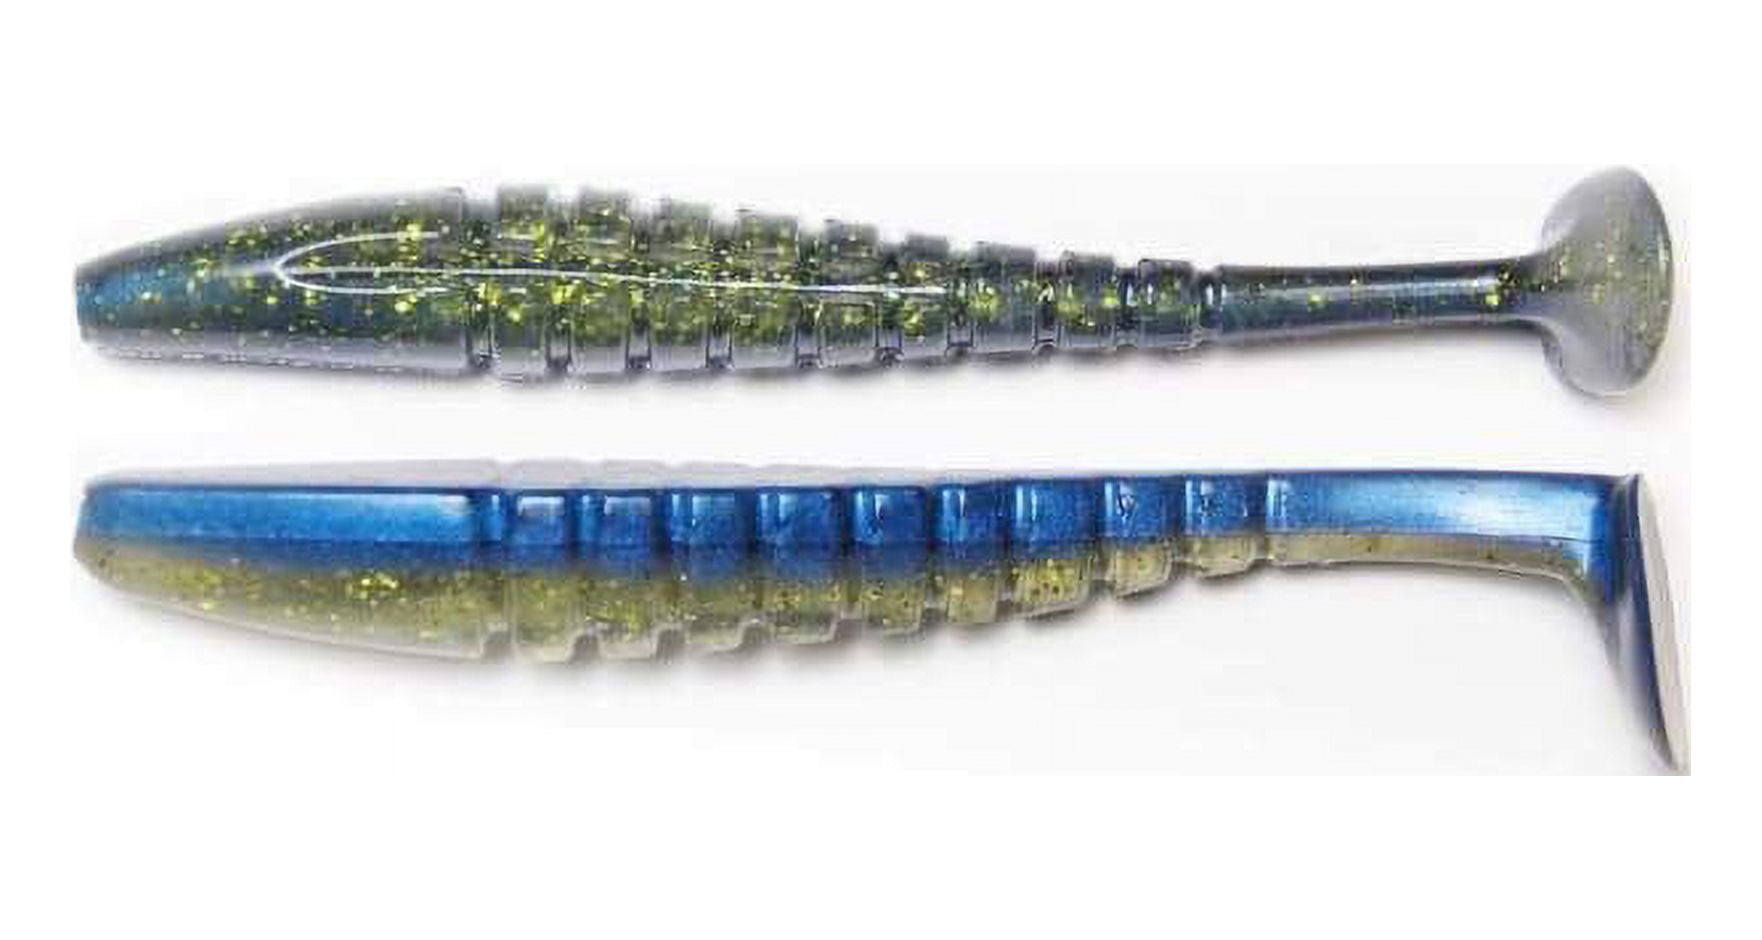 Xzone Pro Series Swammer Paddle Tail Swimbait Sexy Shad Length 5 1/2 inch 